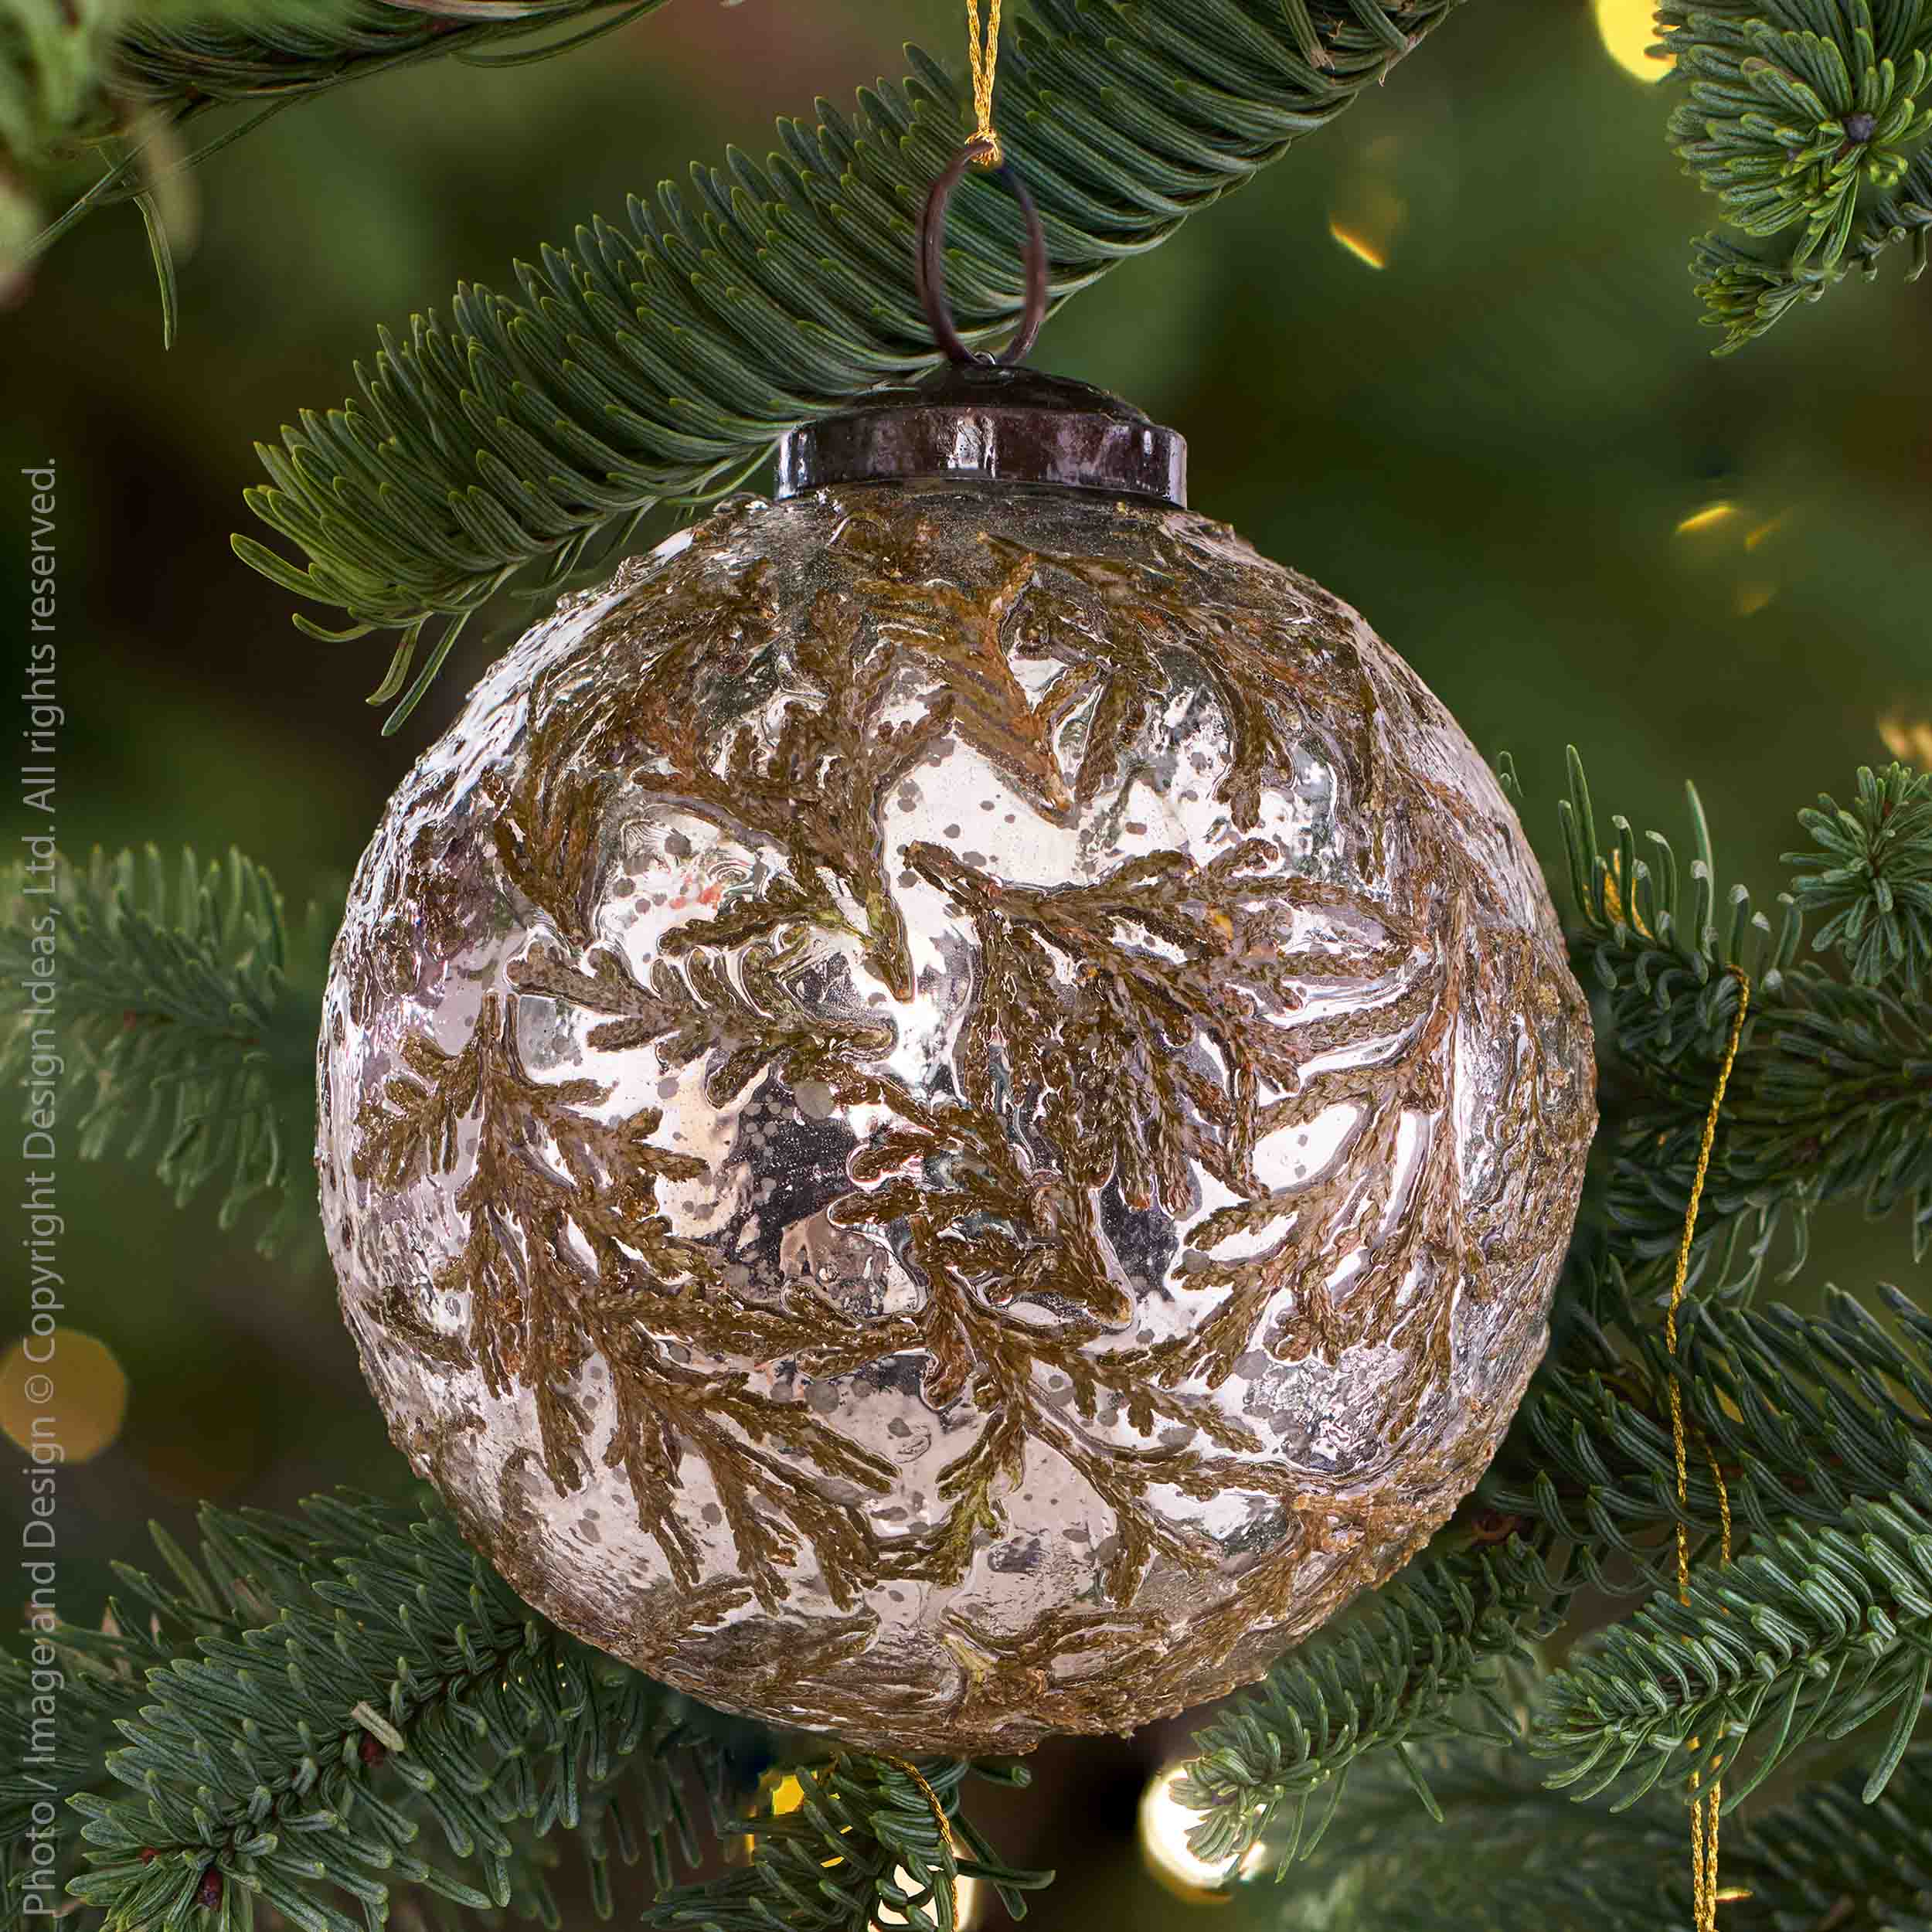 Balsam™ Mouth Blown Glass Ornament - 4 inch